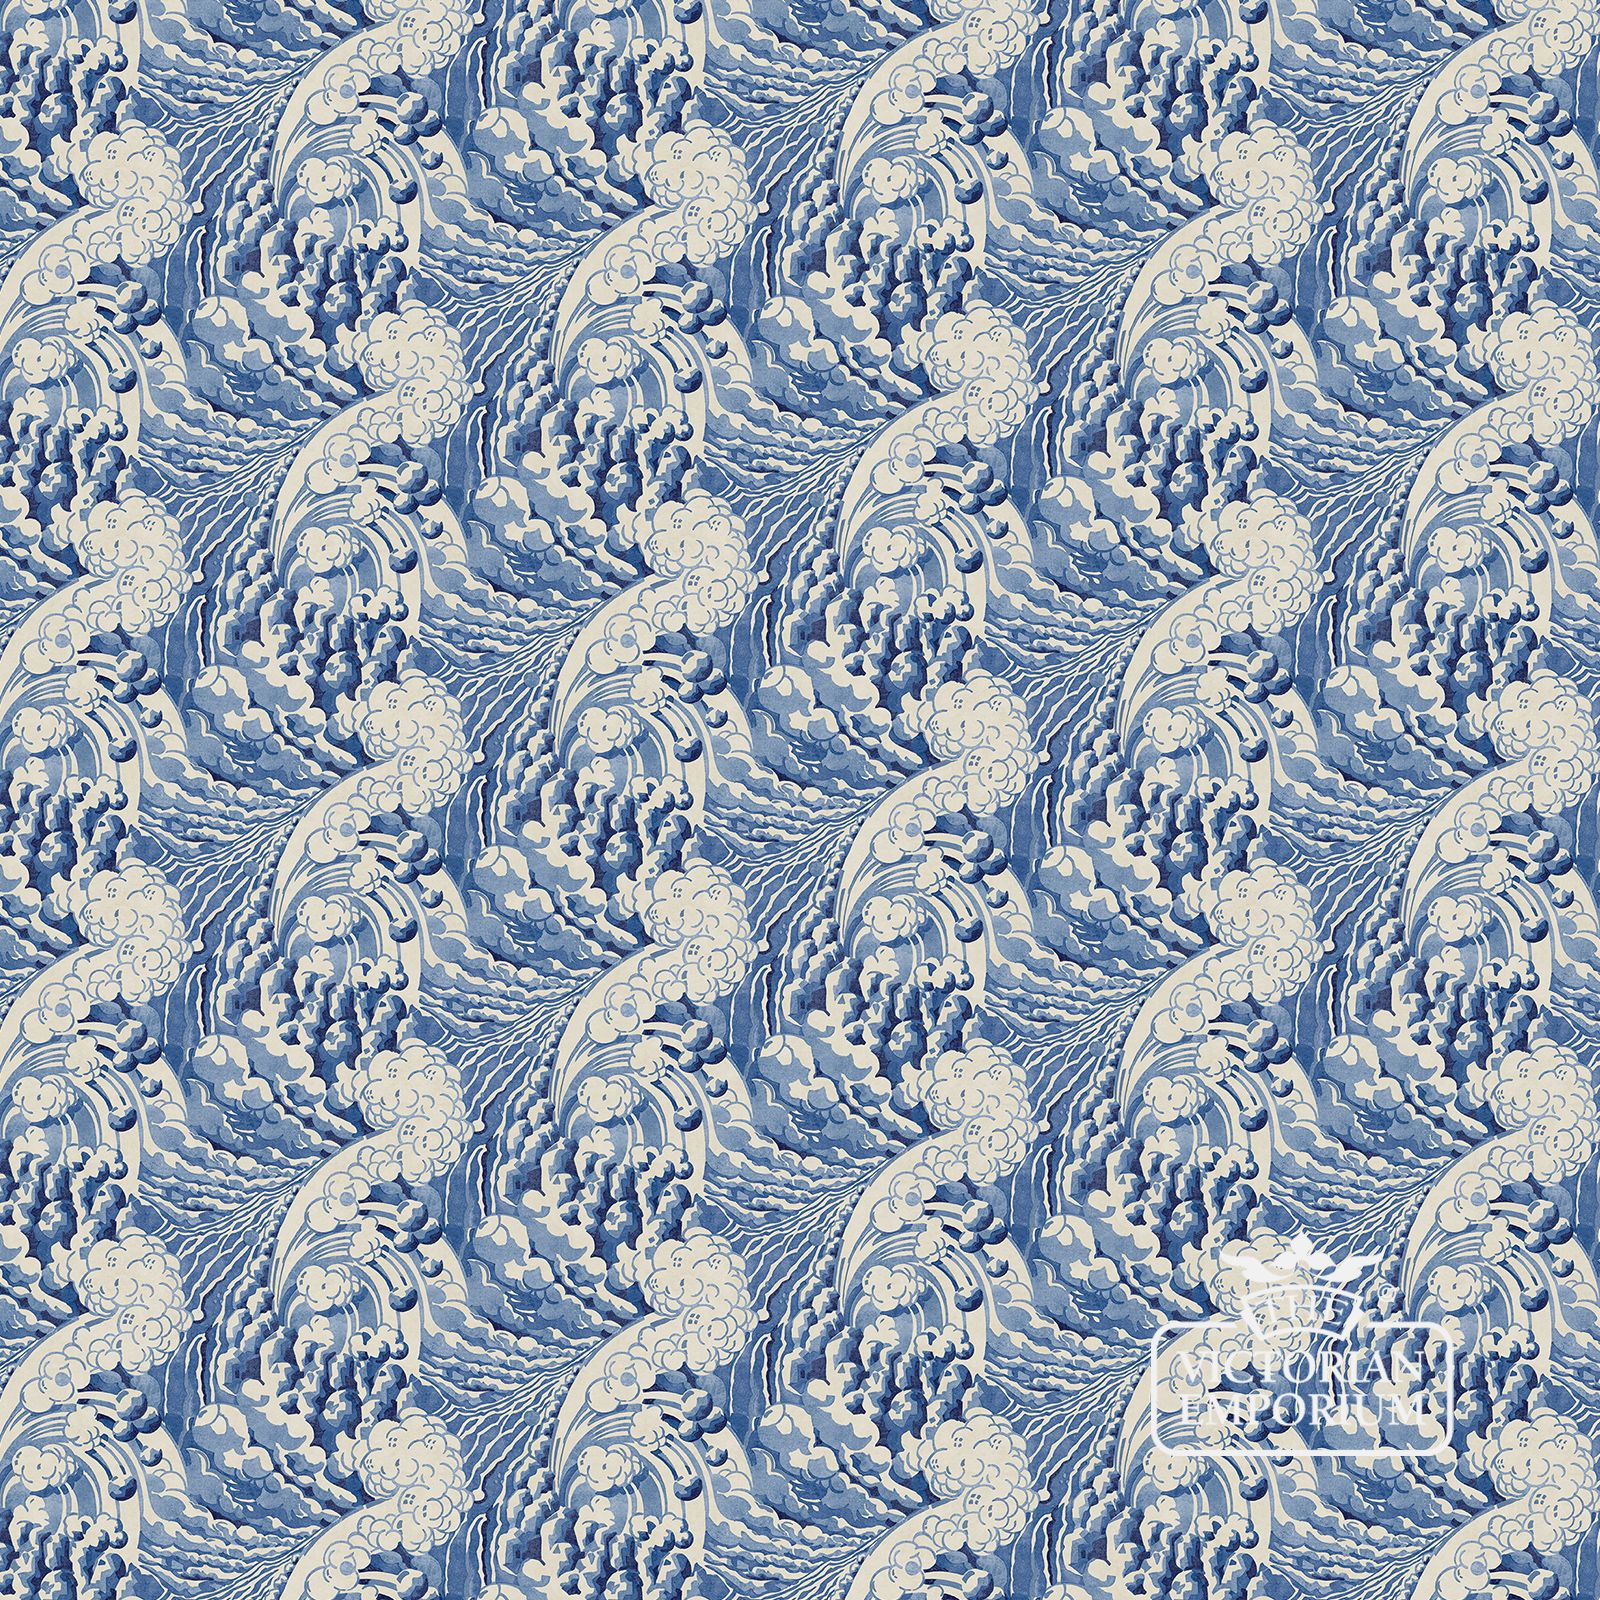 Waves wallpaper in various shades of deep blue